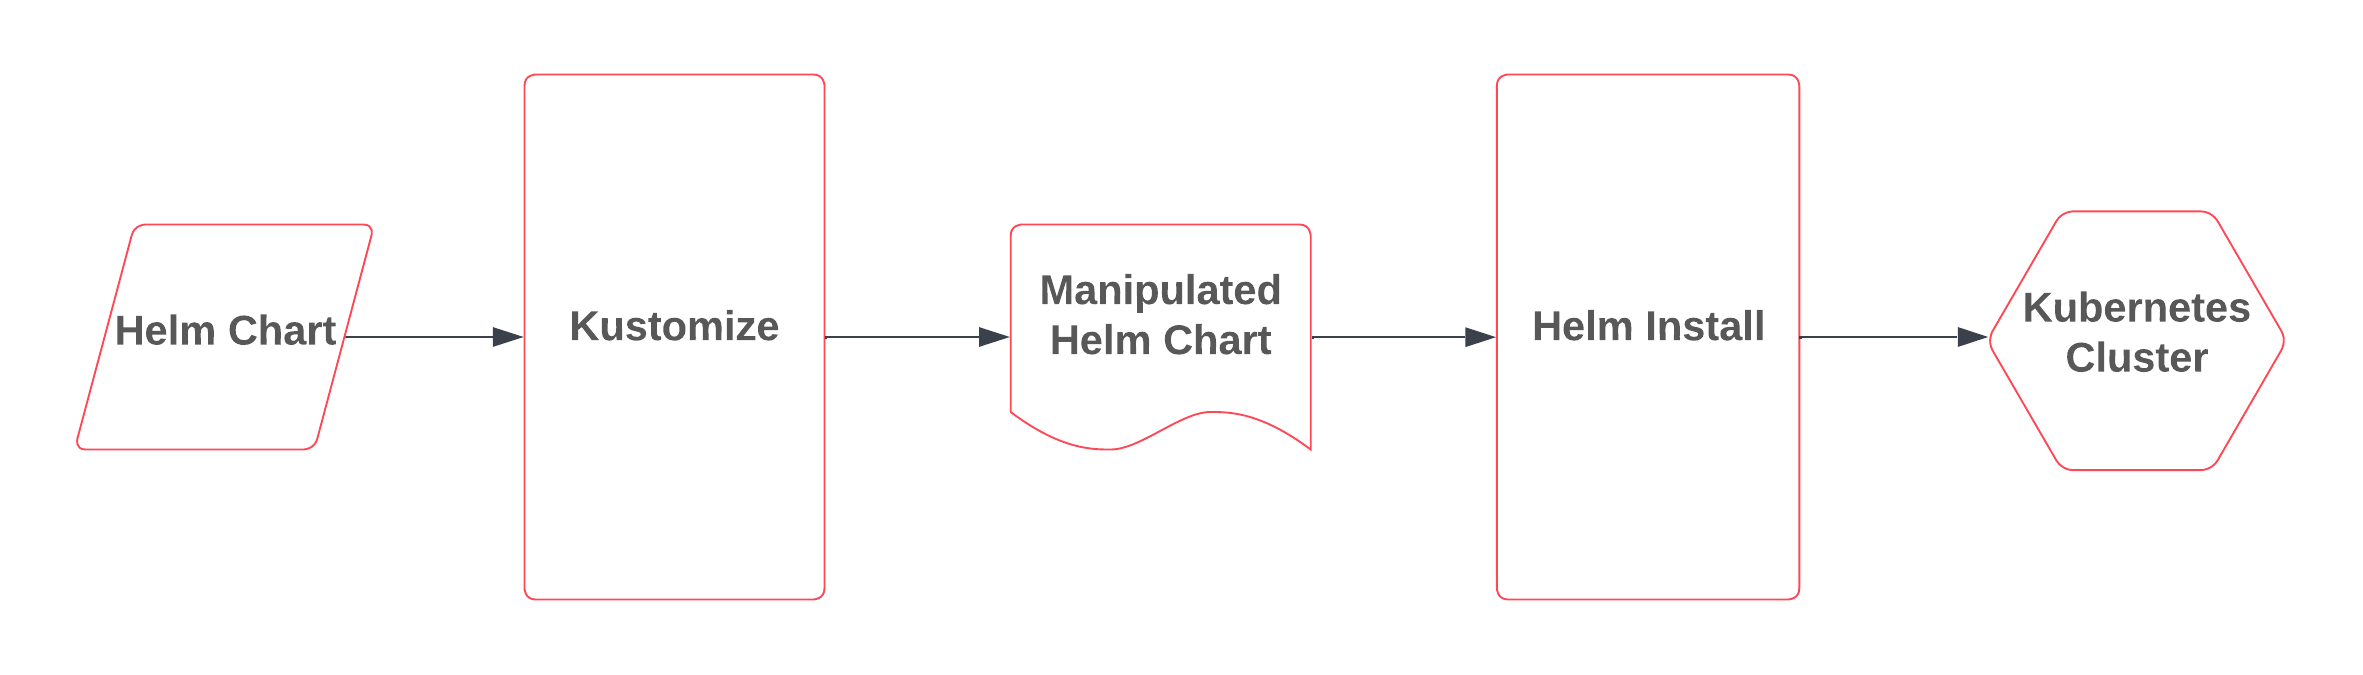 Flow chart of a v1beta1 Helm chart deployment to a cluster